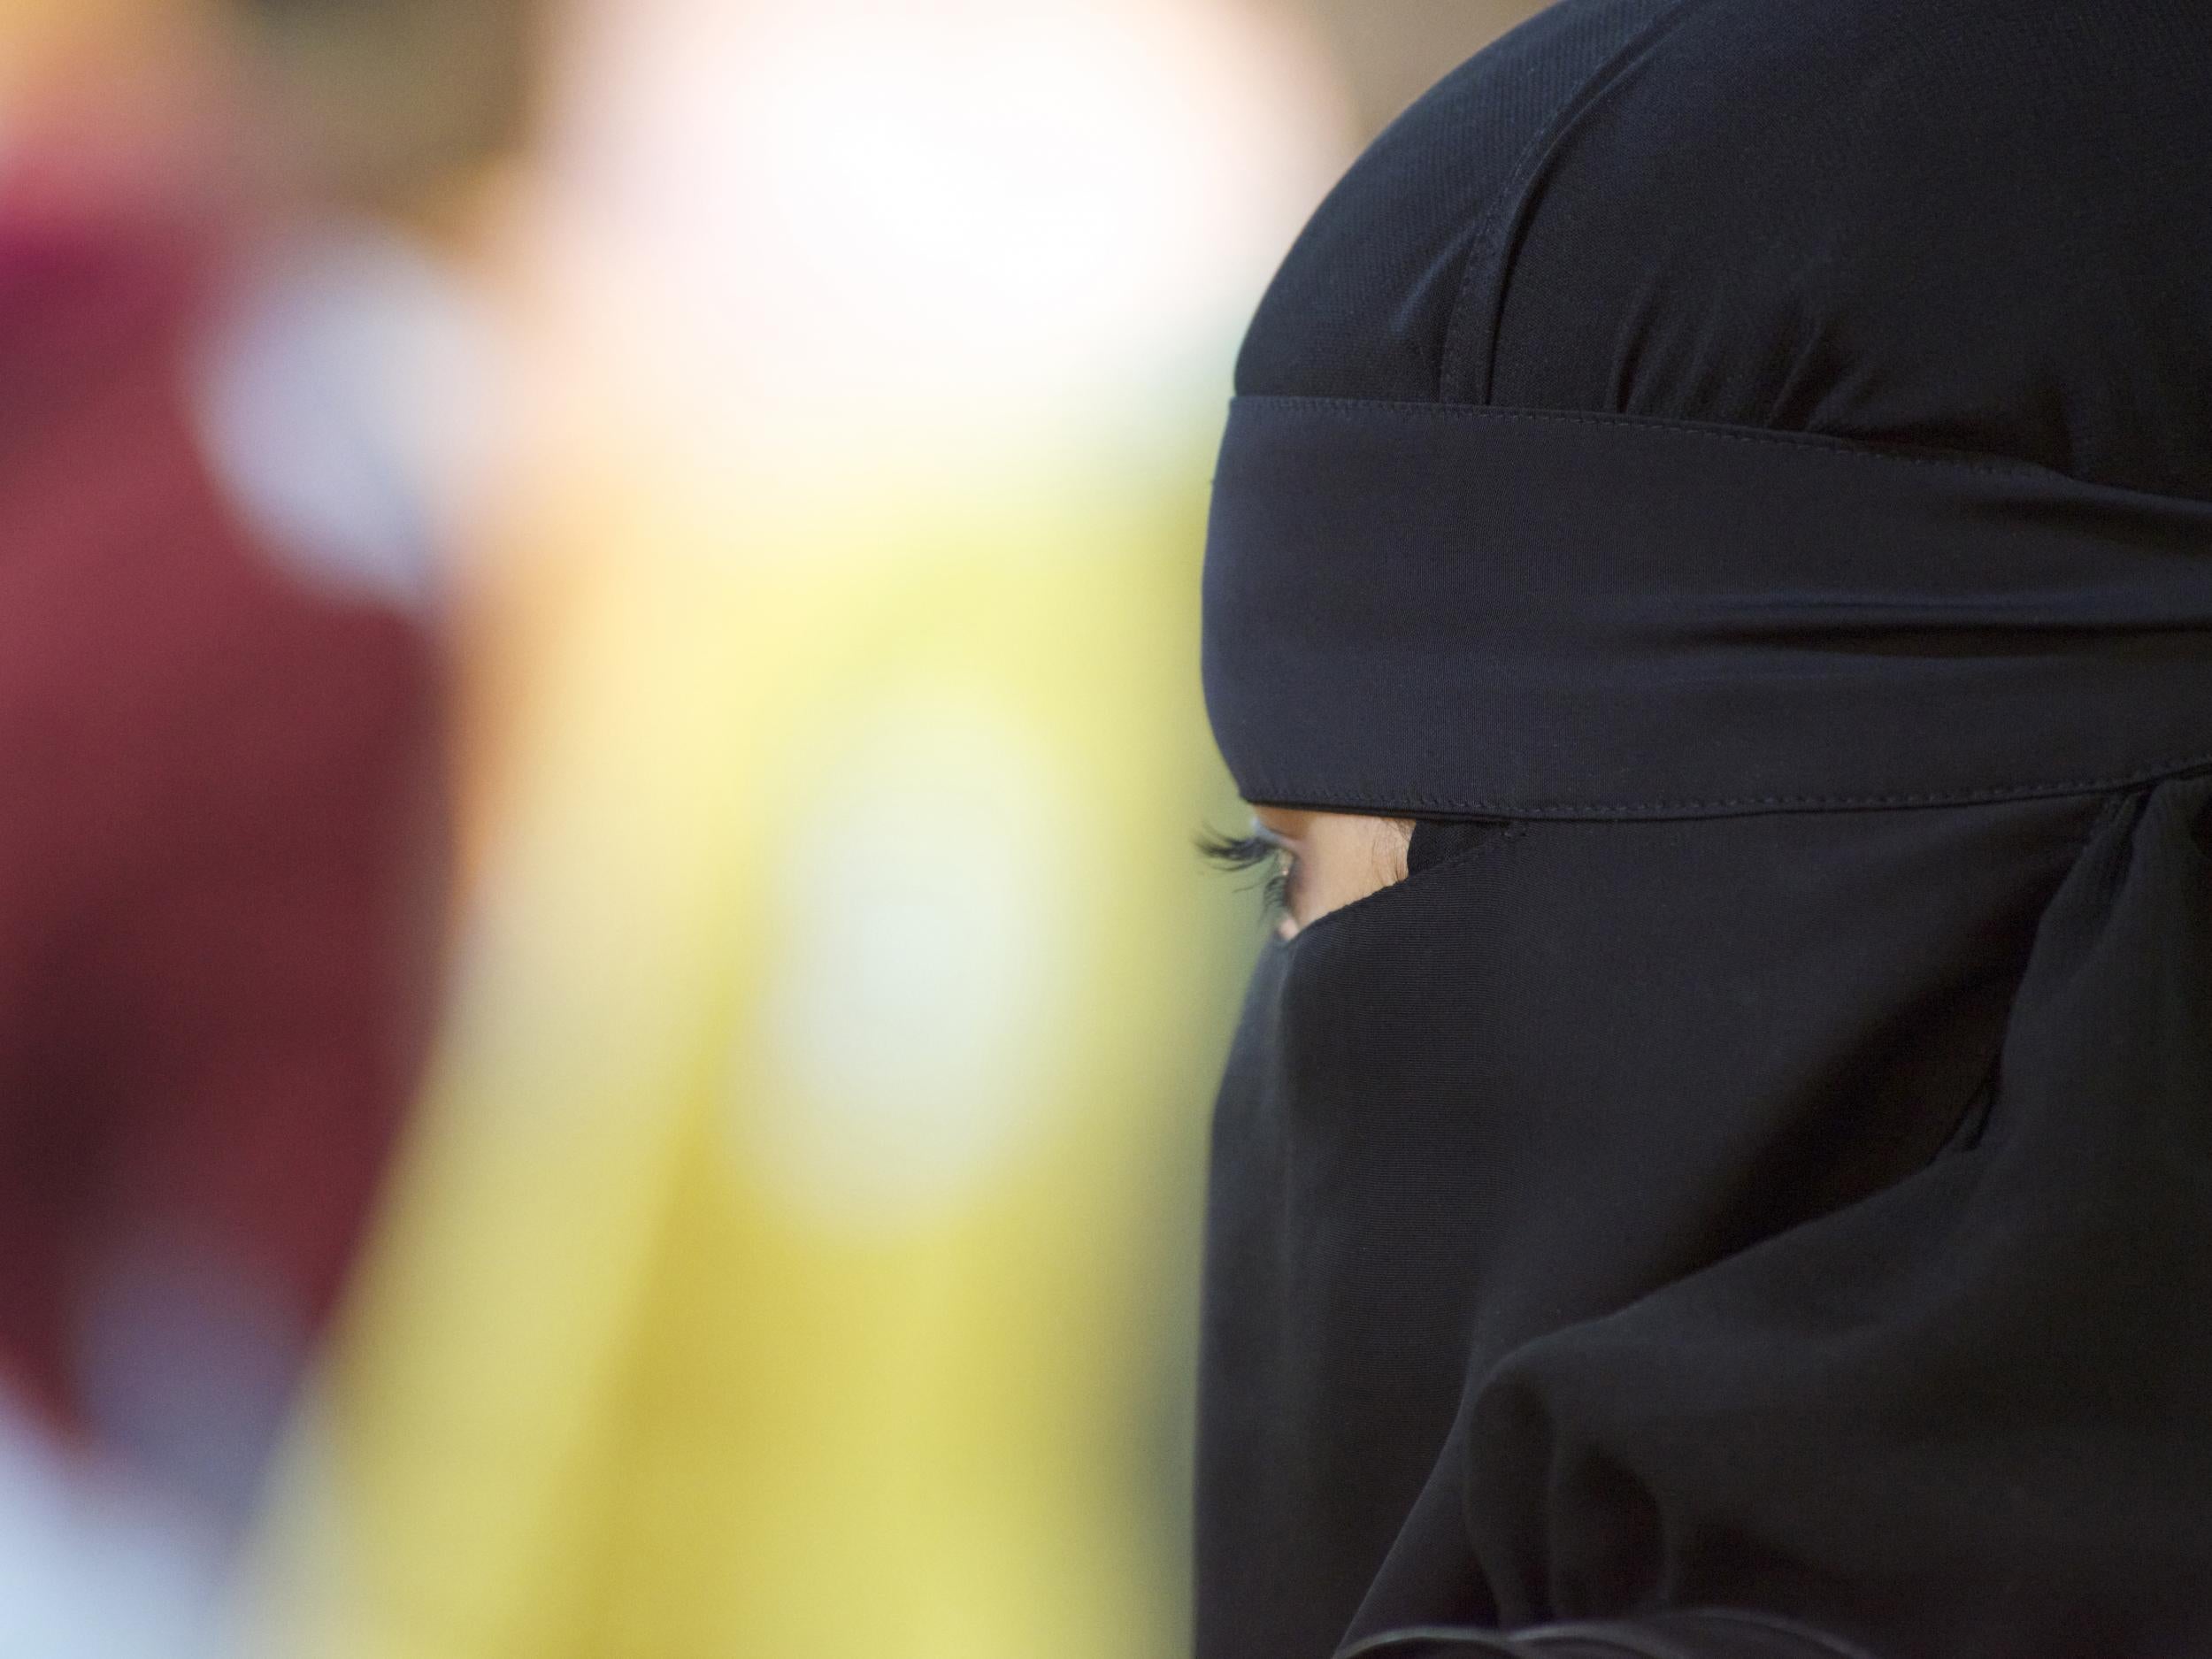 Anti-burka laws have also been introduced in France and Belgium